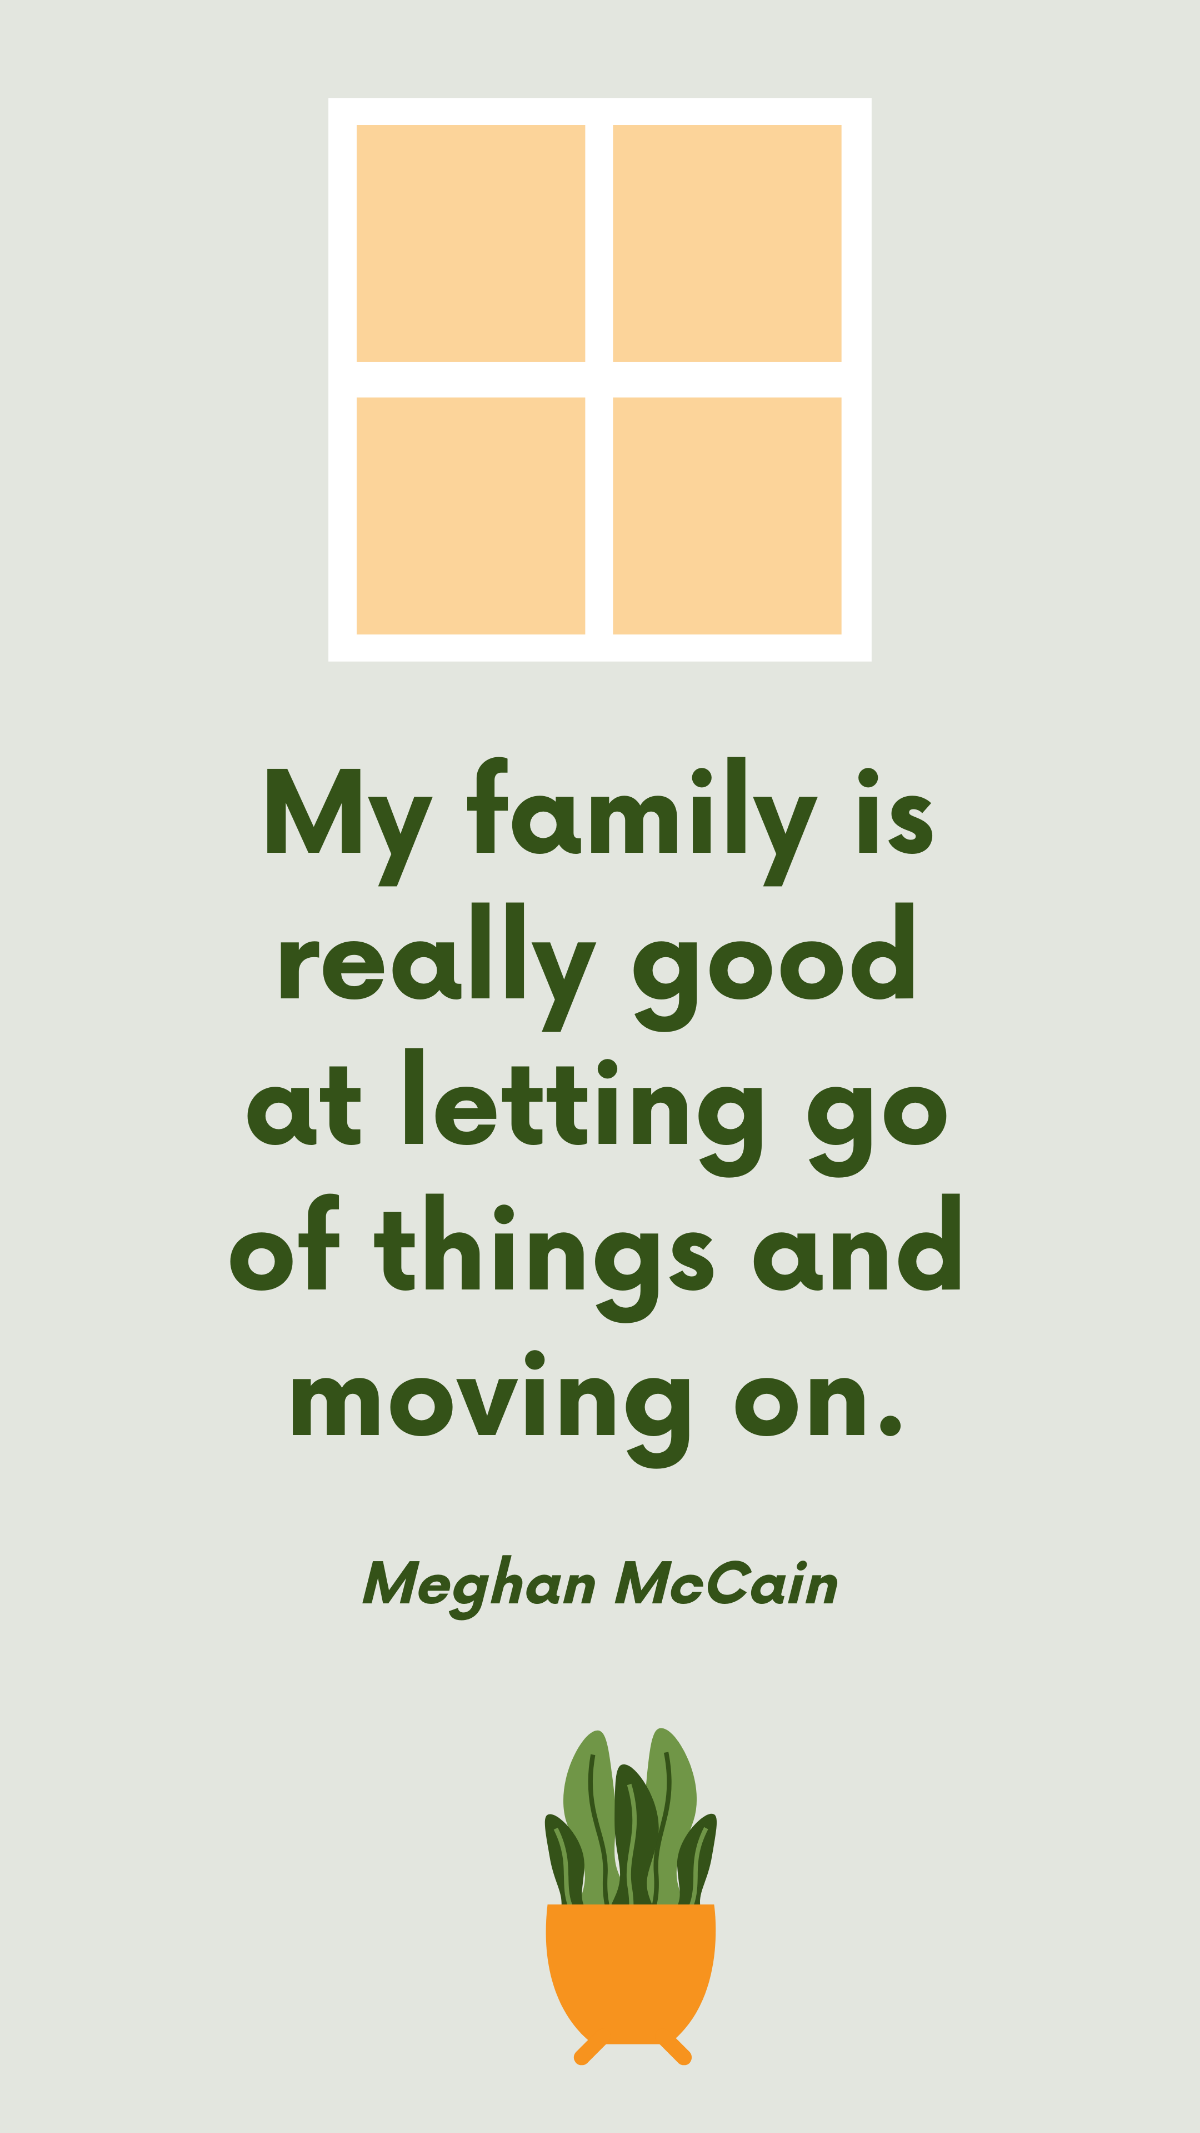 Meghan McCain - My family is really good at letting go of things and moving on. Template